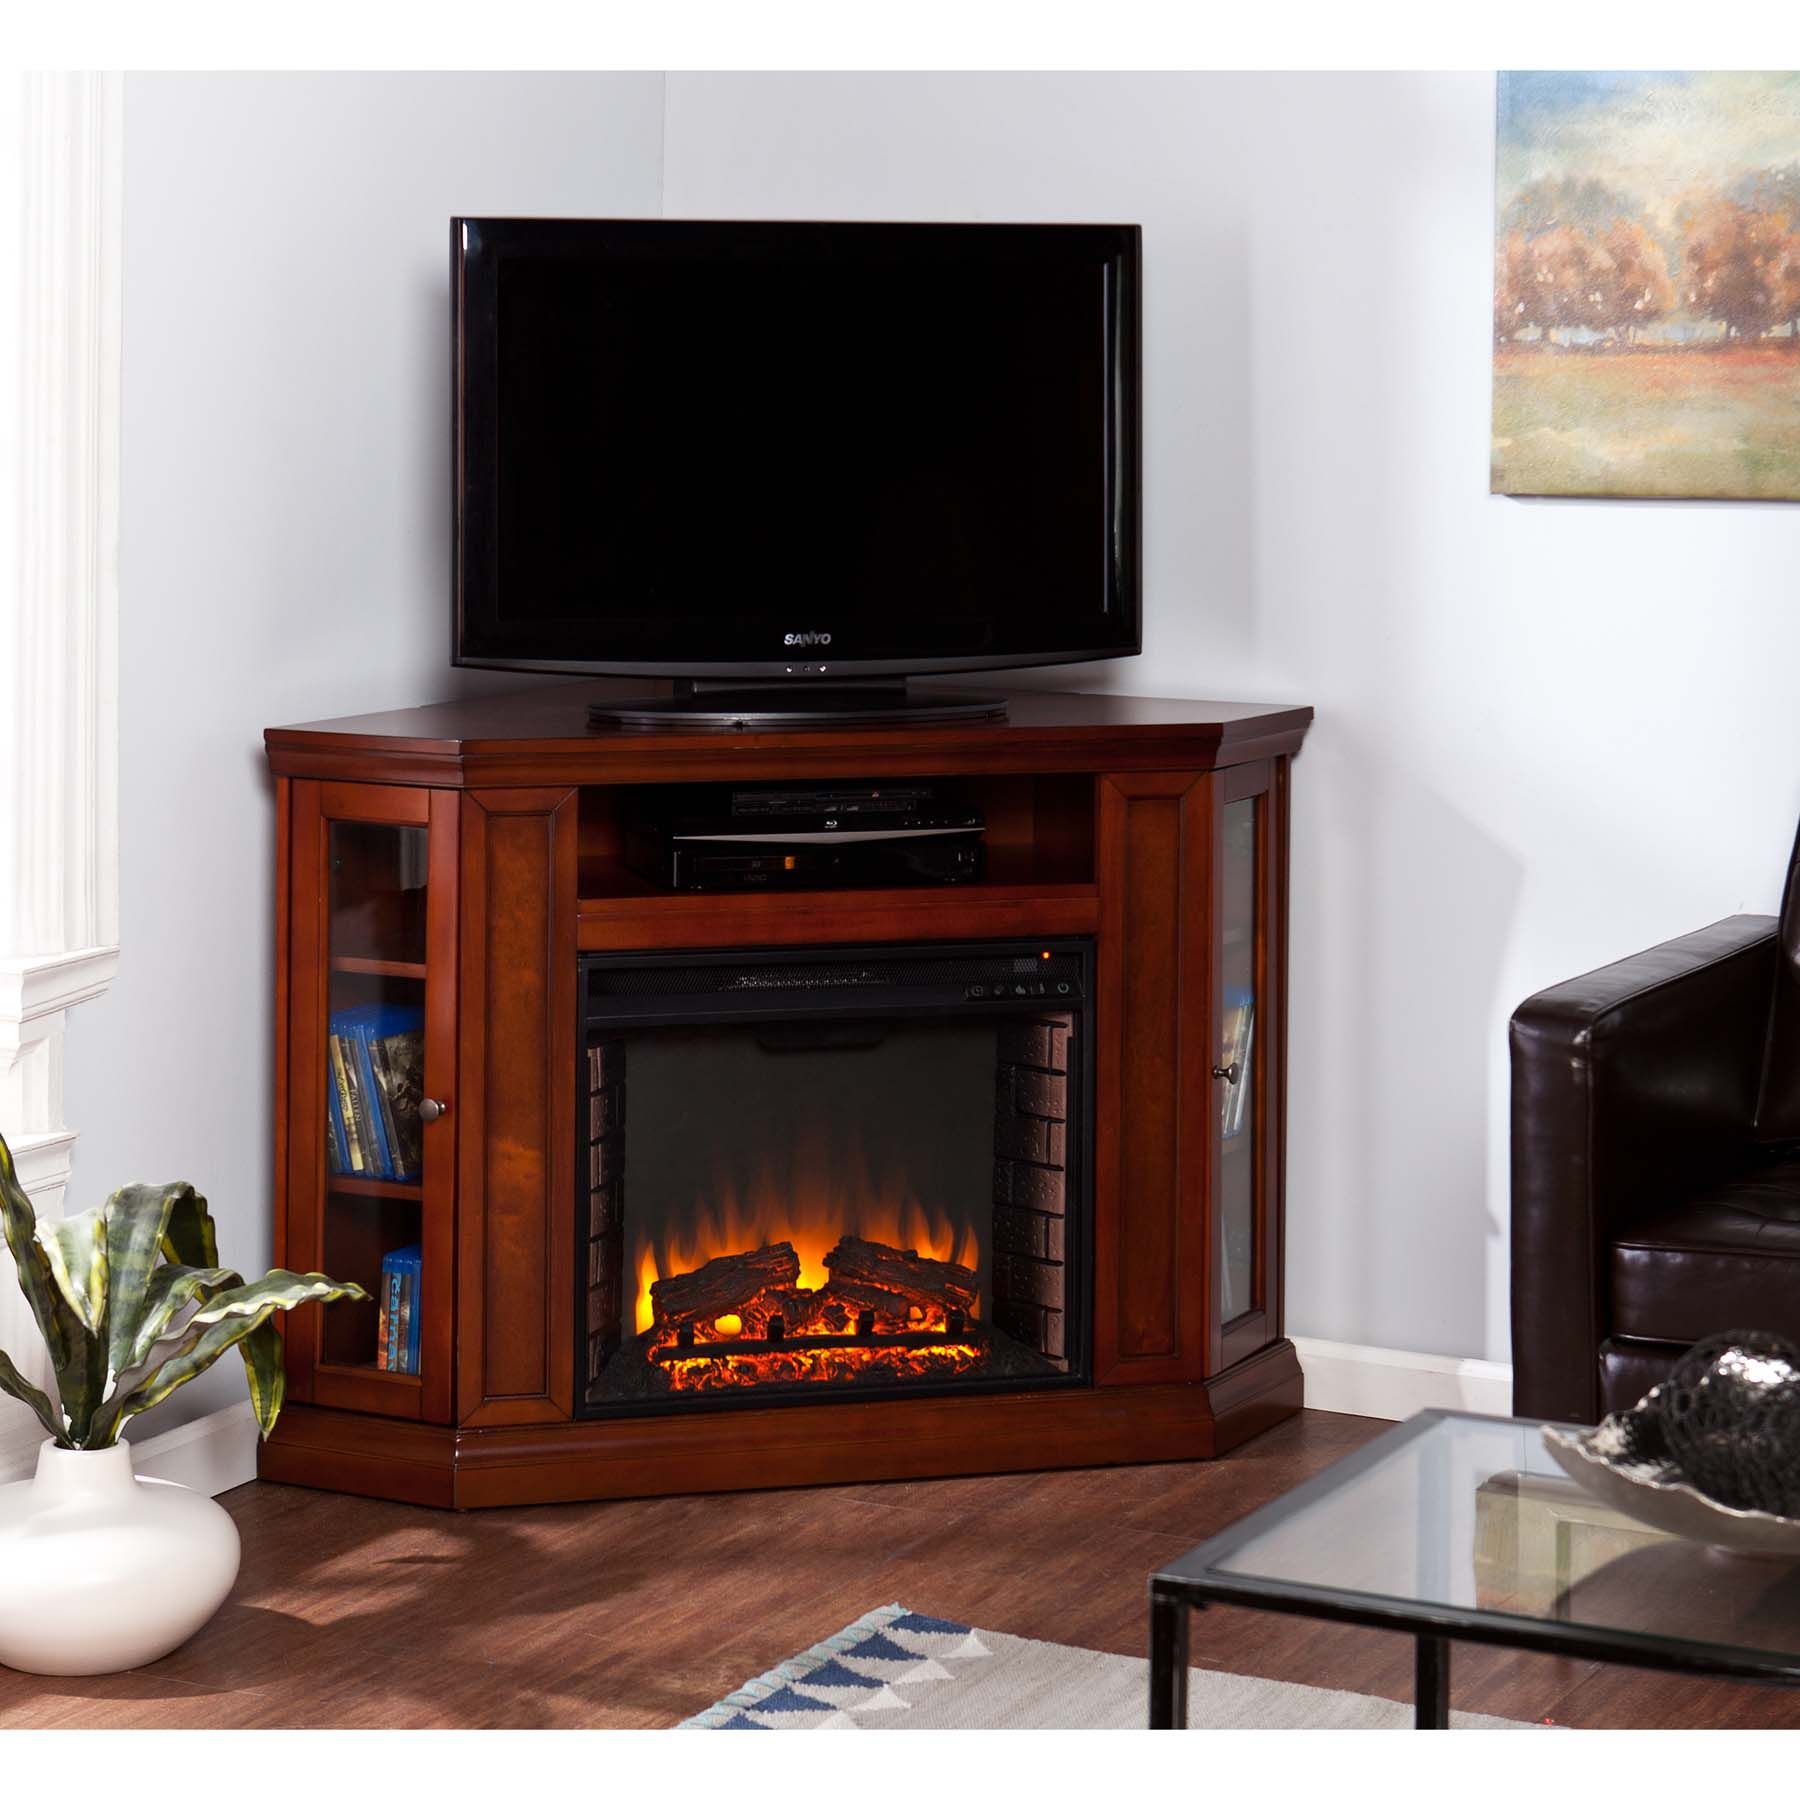 Infrared Fireplace Insert Luxury Elegantly Crafted Rustic Electric Fireplaces